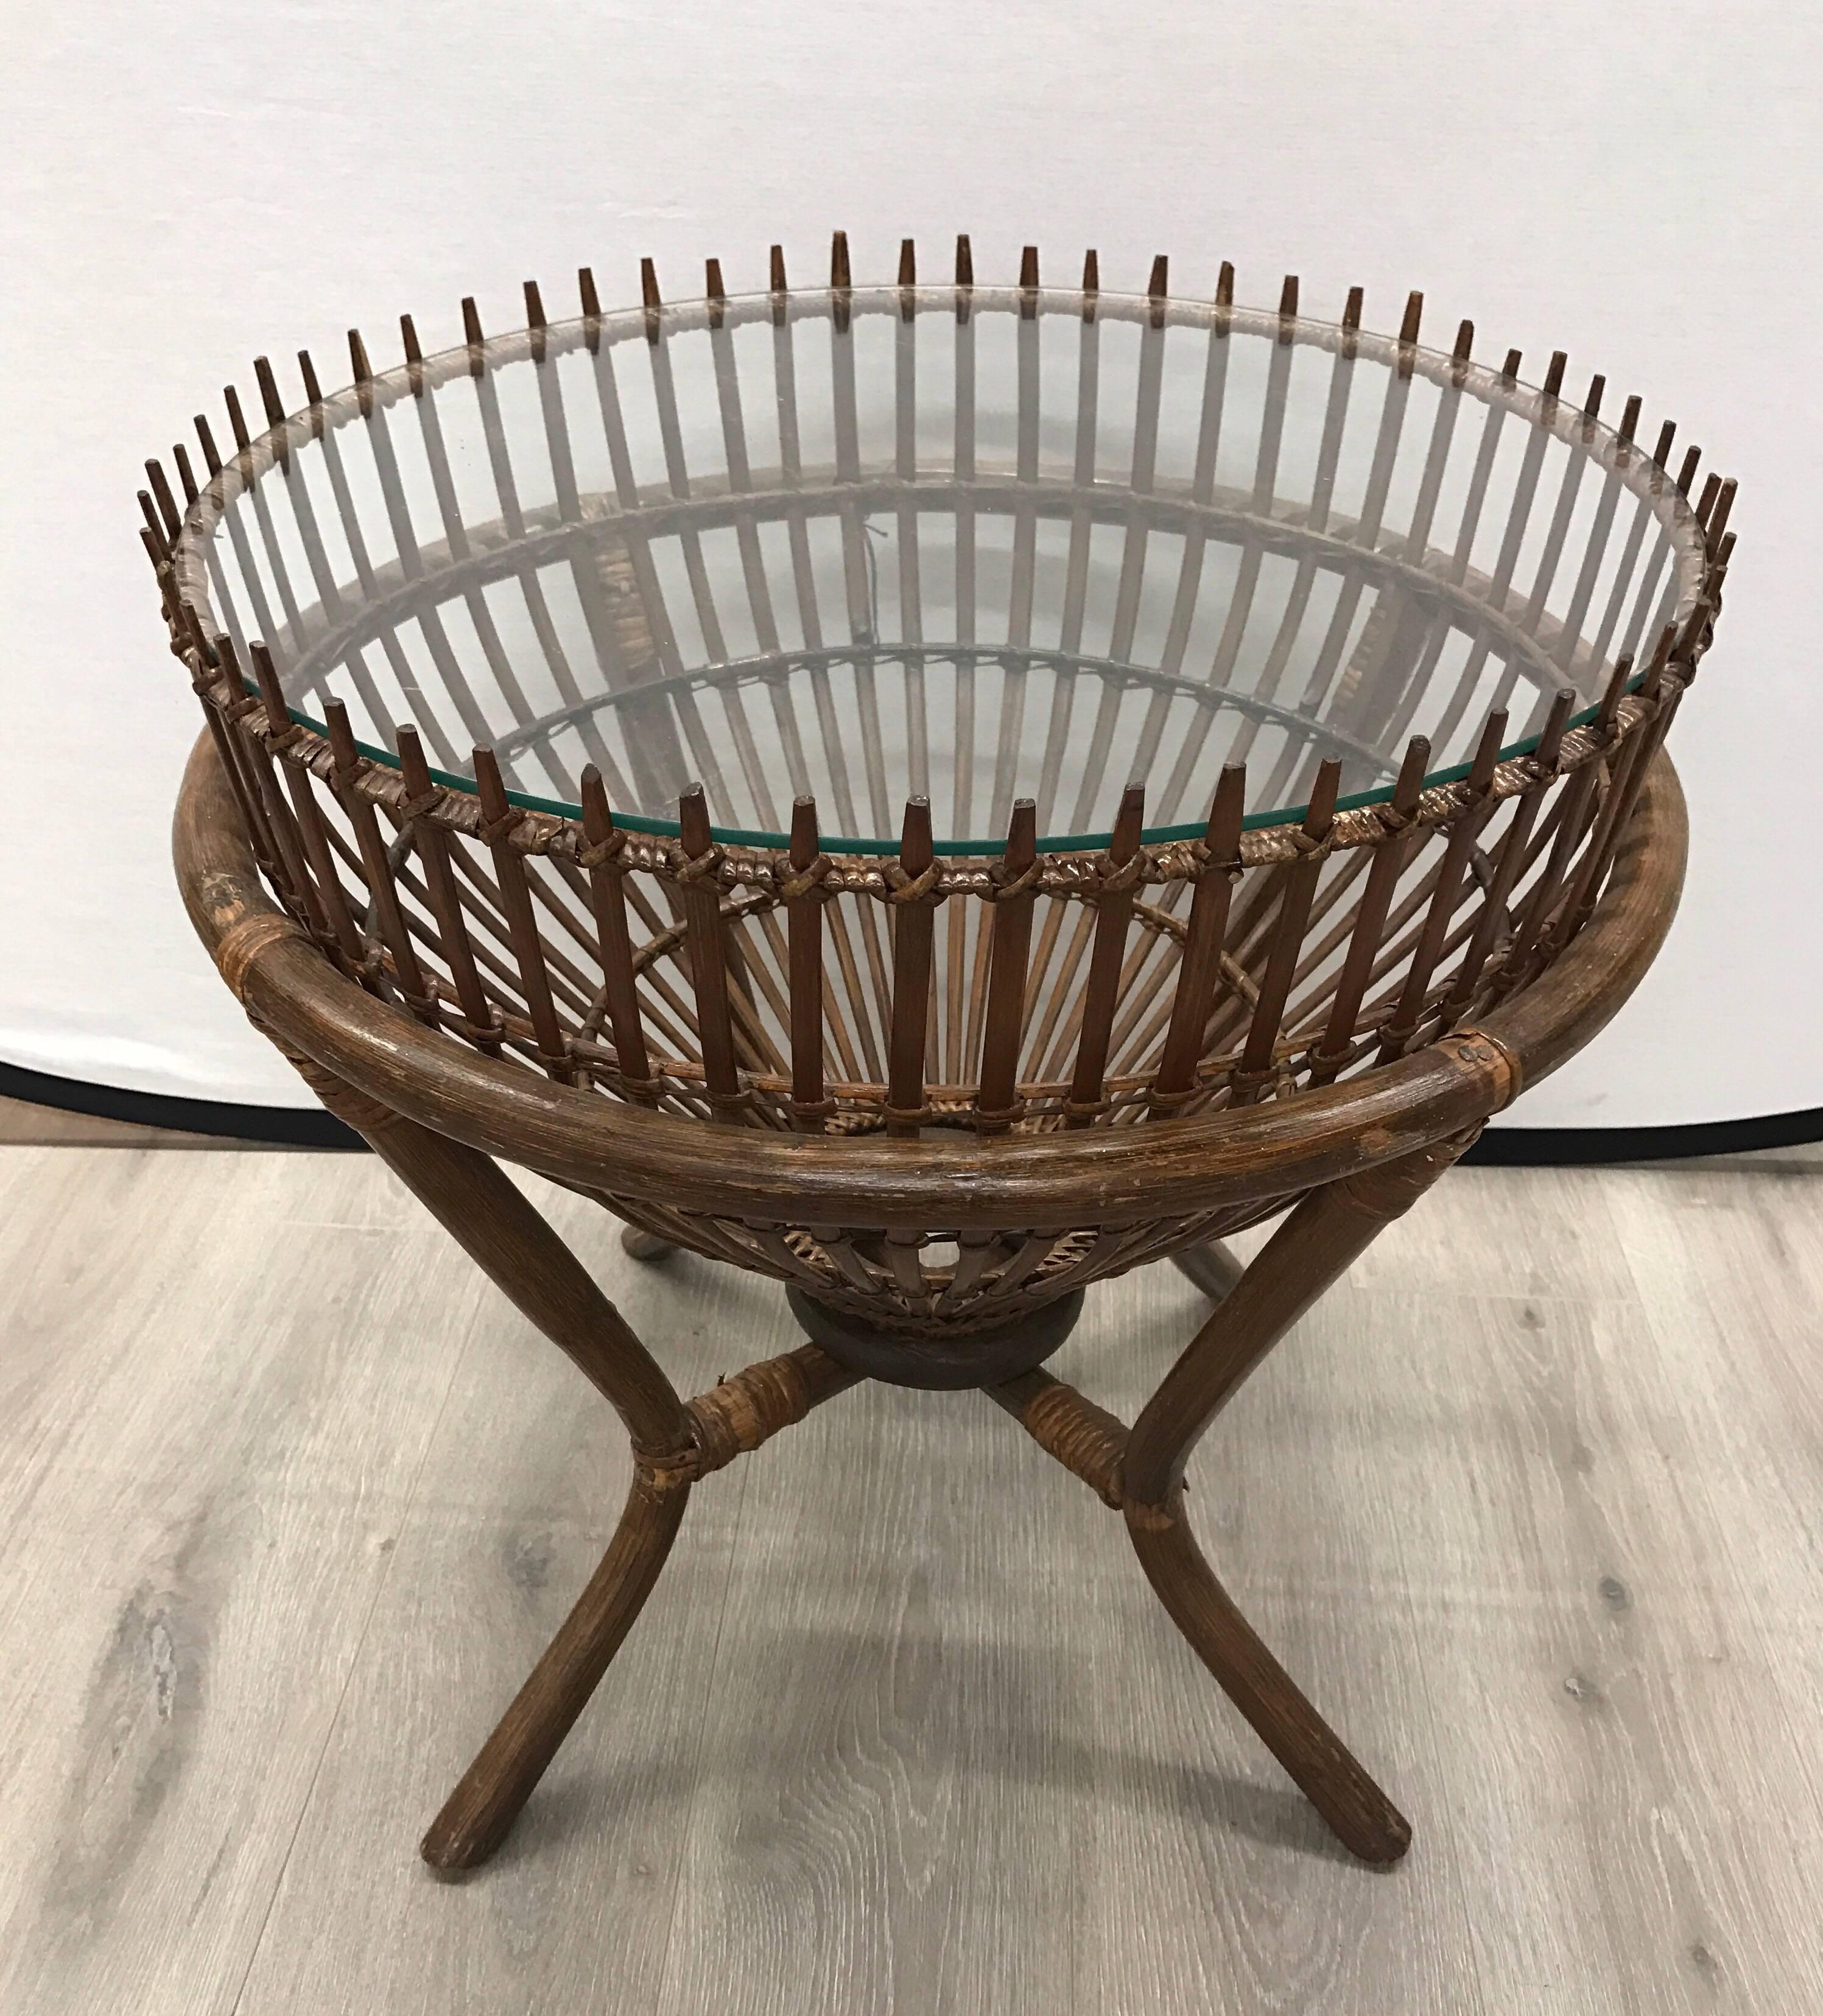 Pair of vintage Franco Albini style round fish trap side tables with glass tops. Handcrafted from bamboo and rattan with a glass top.
 